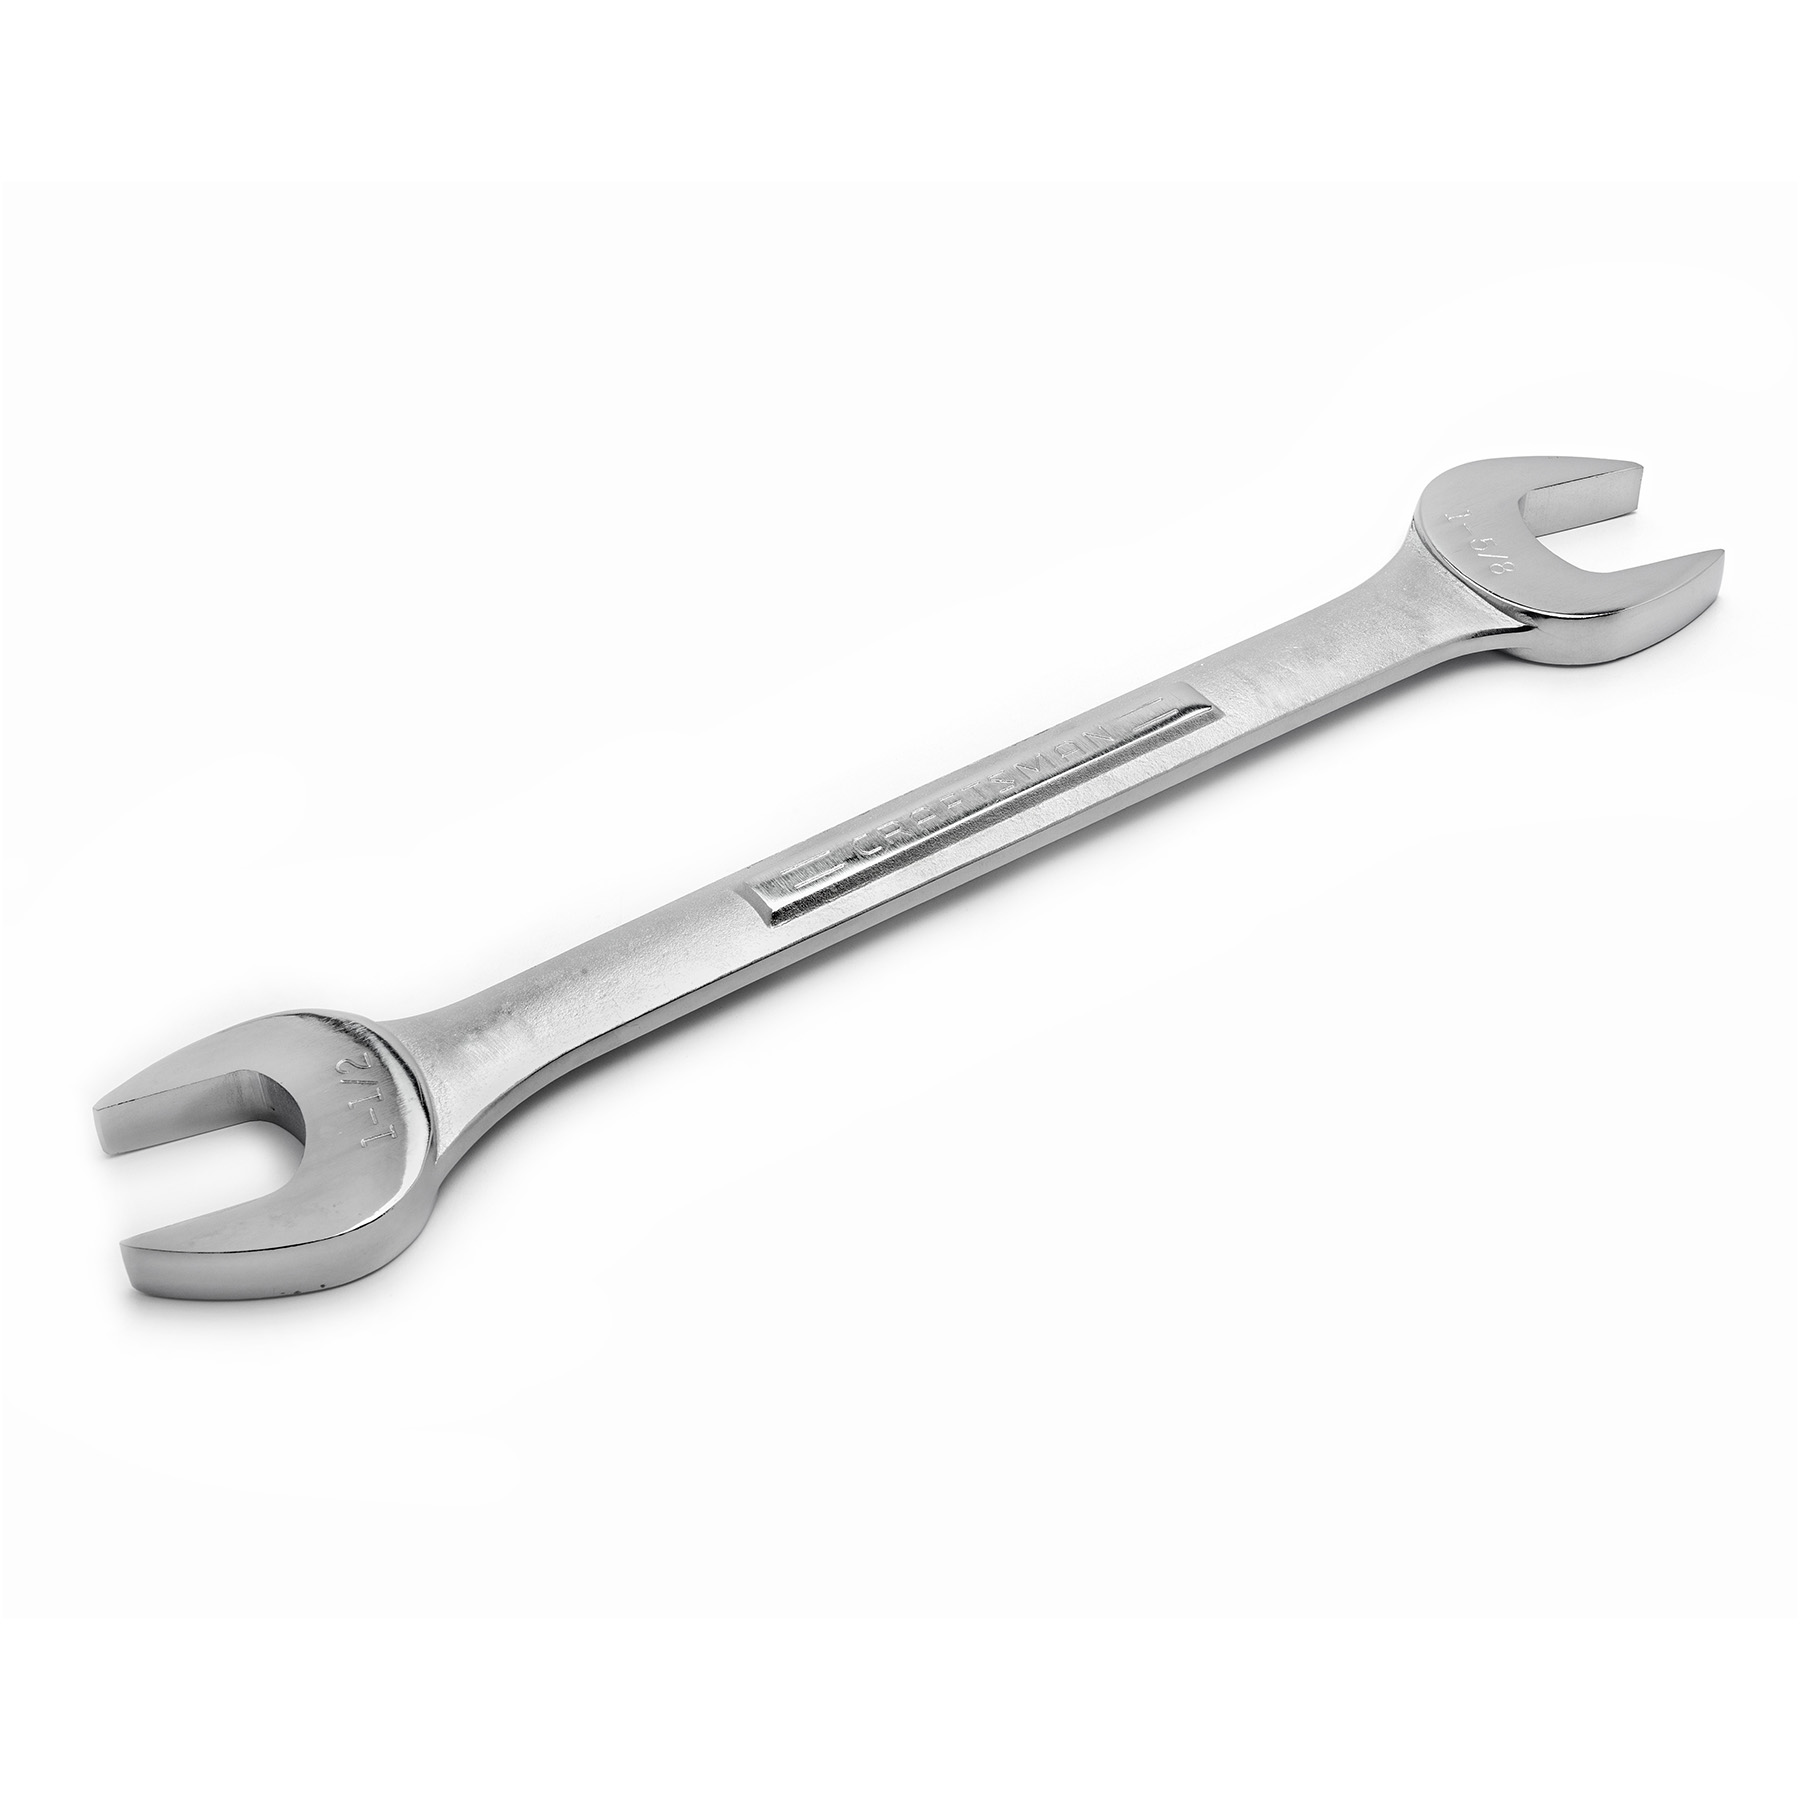 Craftsman 11/2 x 15/8 in. Open End Wrench Shop Your Way Online Shopping & Earn Points on